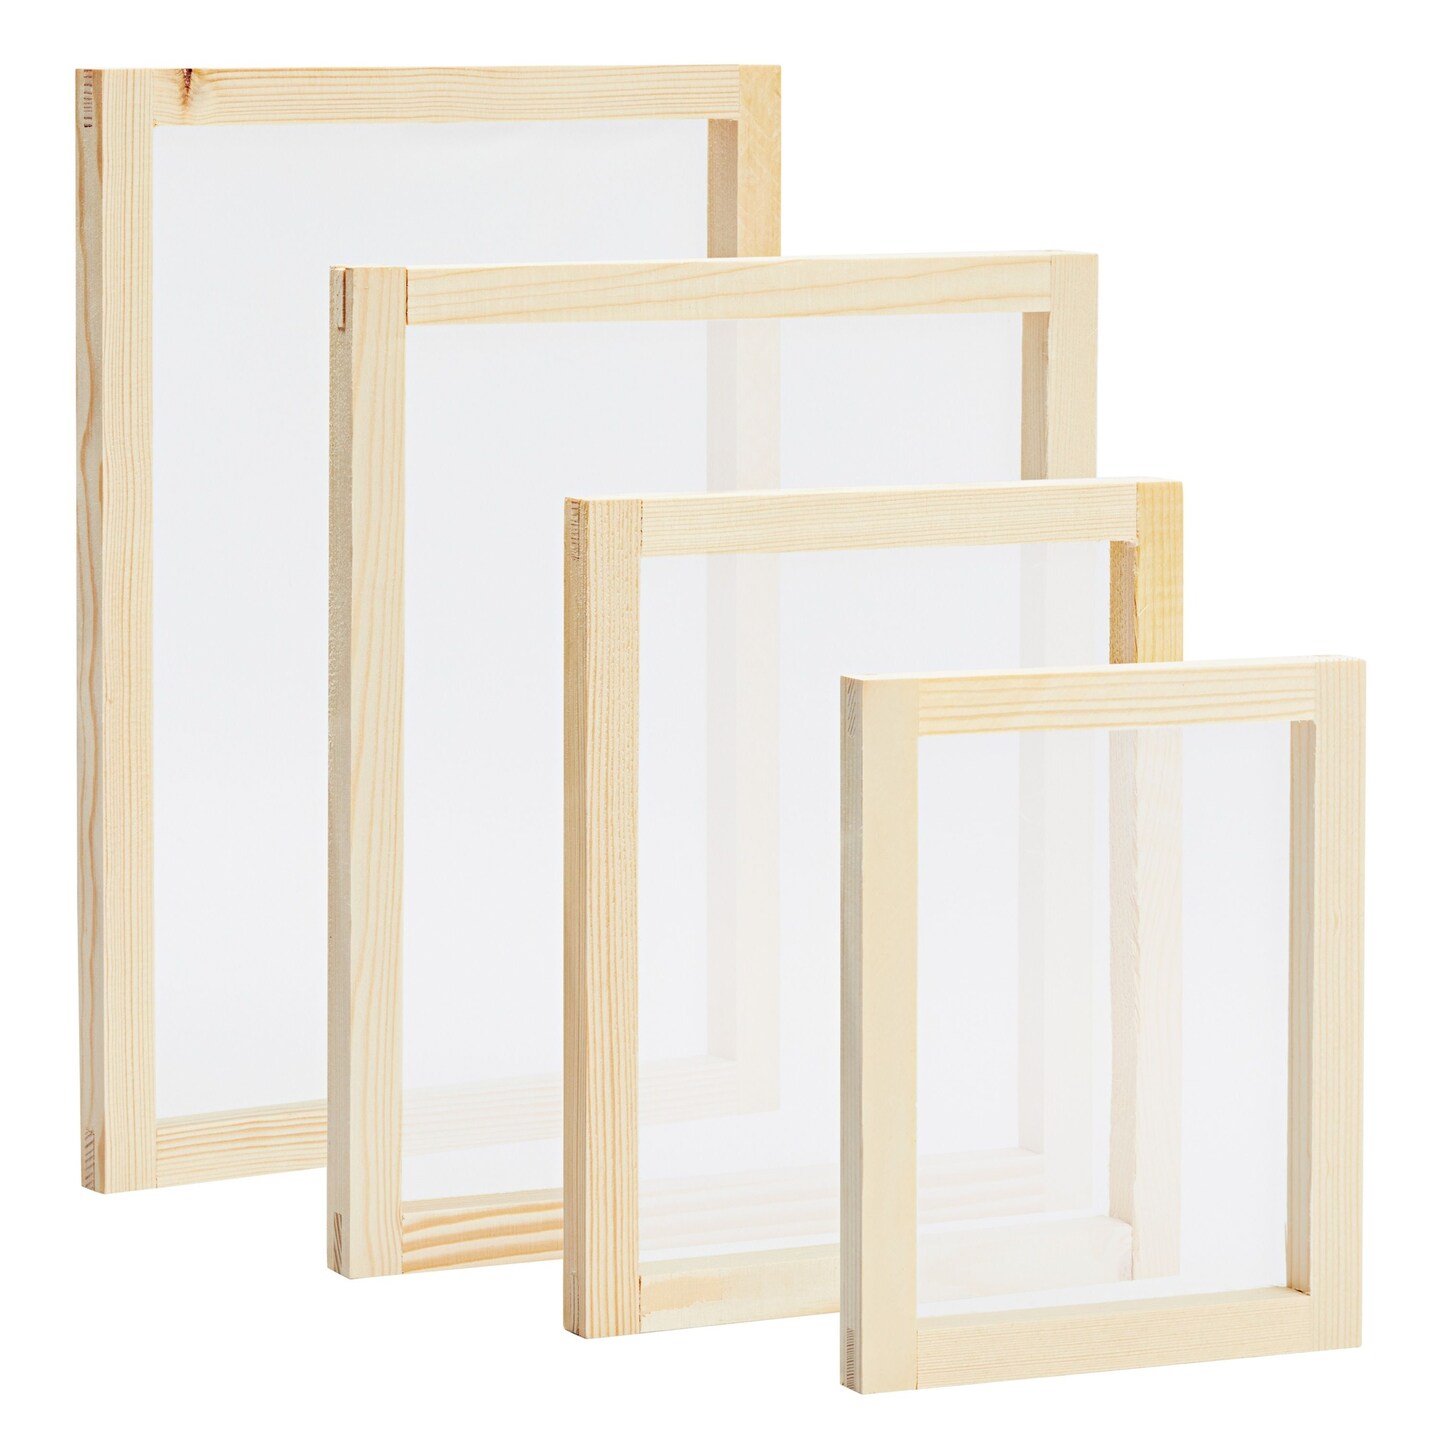 4-Piece Set Wood Silk Screen Printing Frame Kit for Beginners and Kids, 110  White Mesh, 6x8, 8x10, 10x12, 10x14 Frames